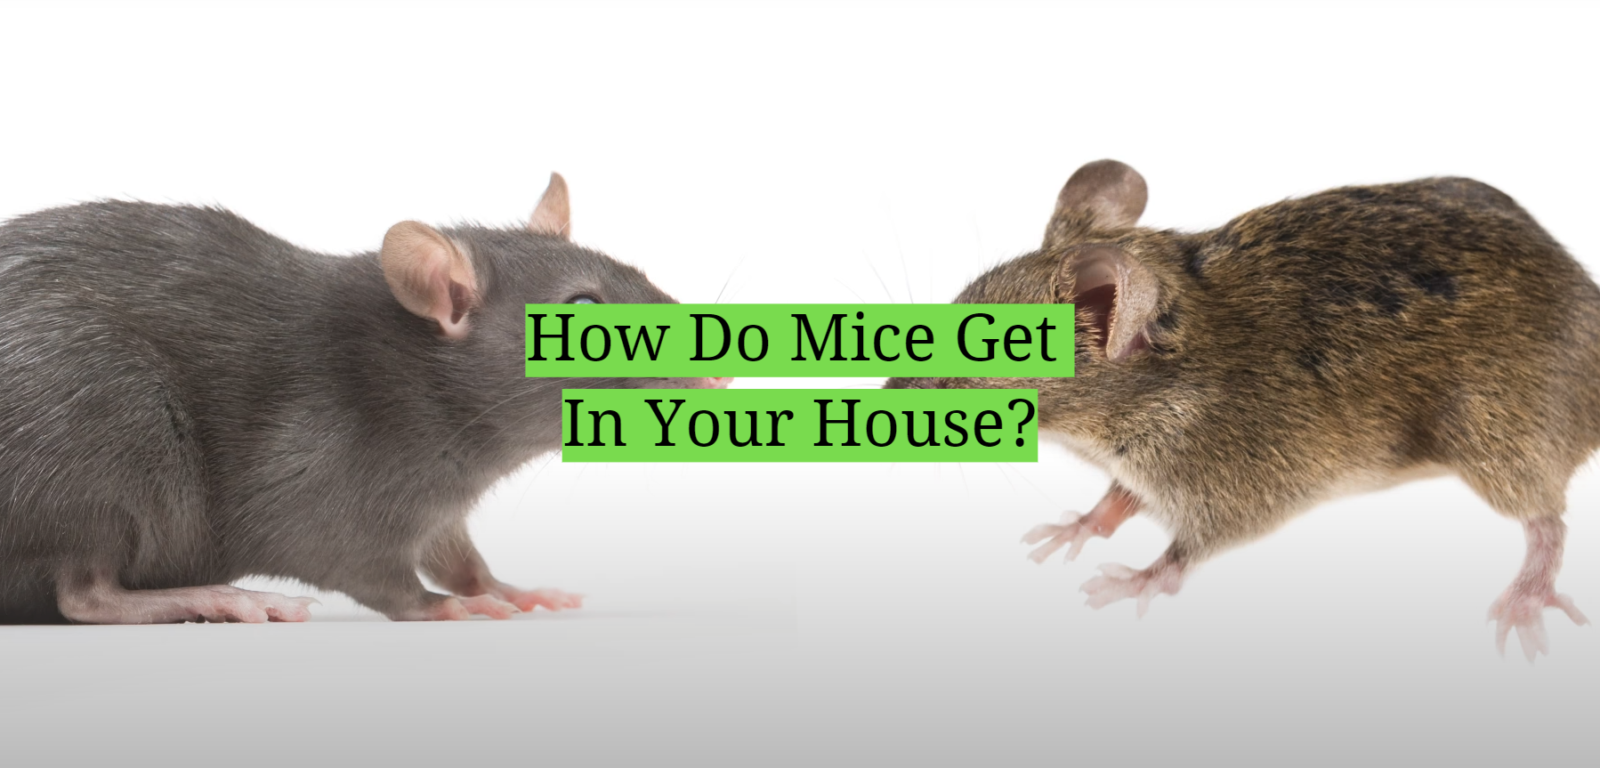 How Do Mice Get In Your House?